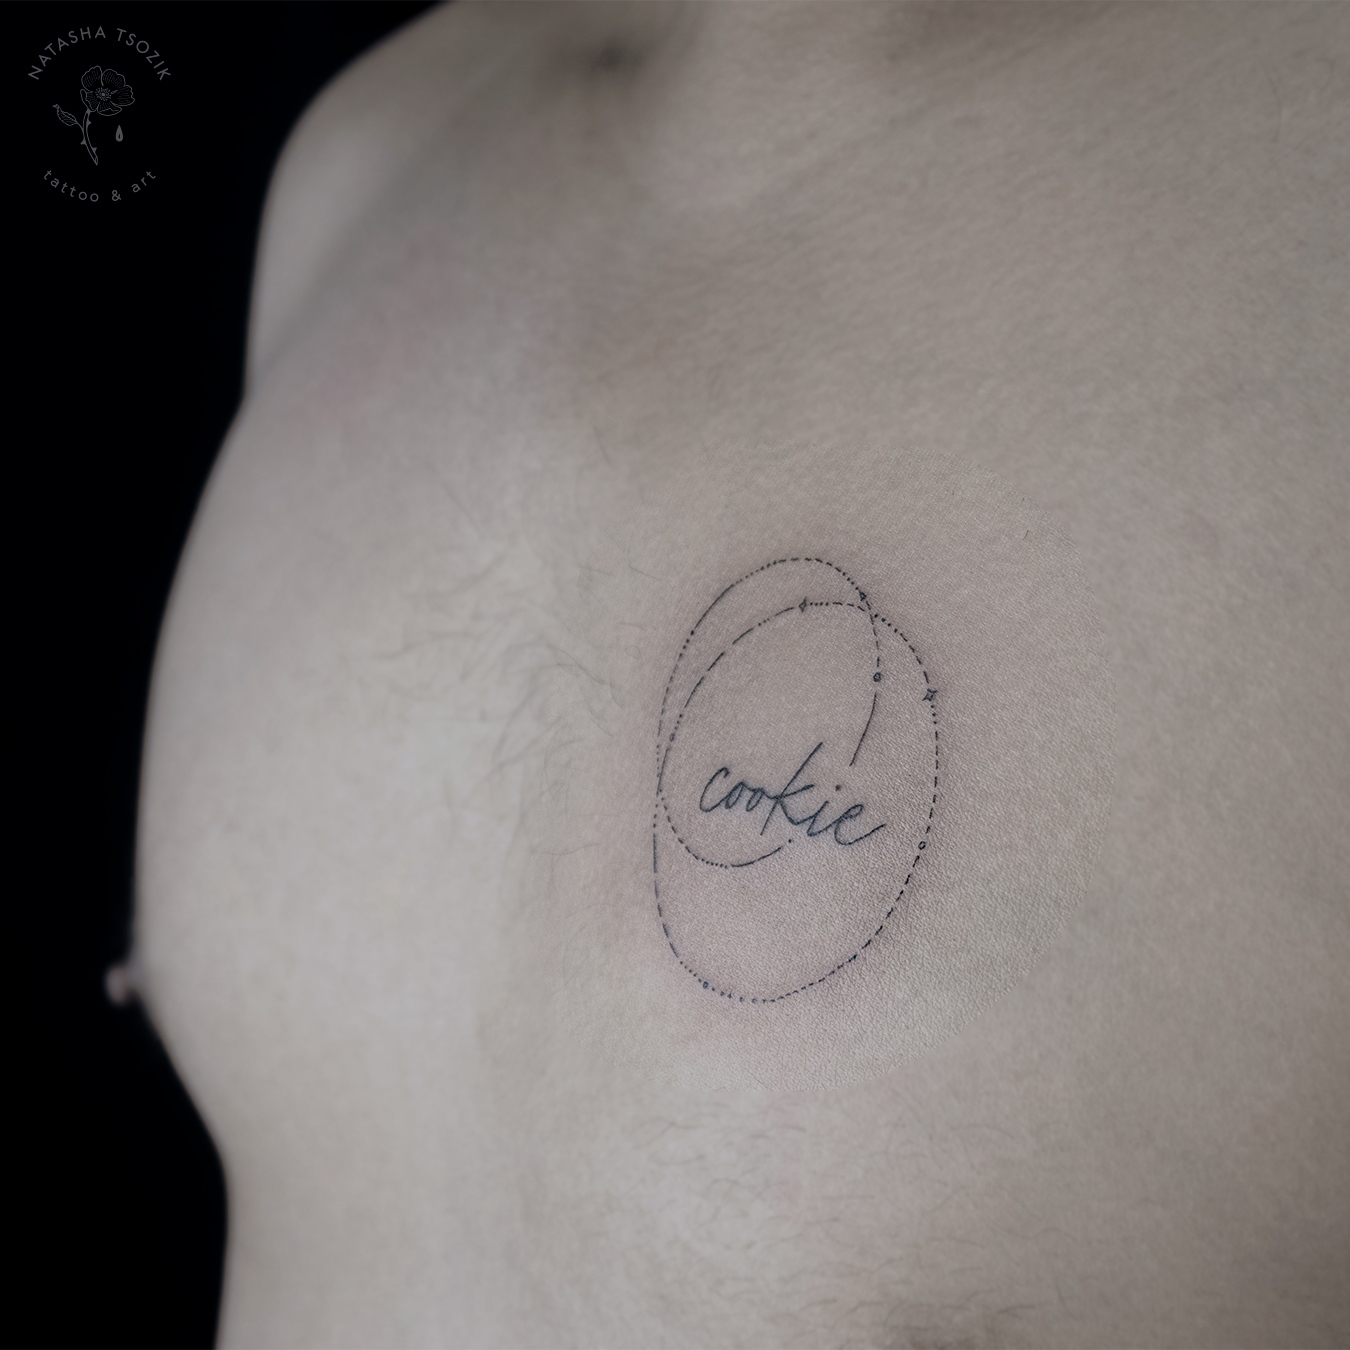 Minimalistic fine line tattoo on a chest picturing circles and an inscription.